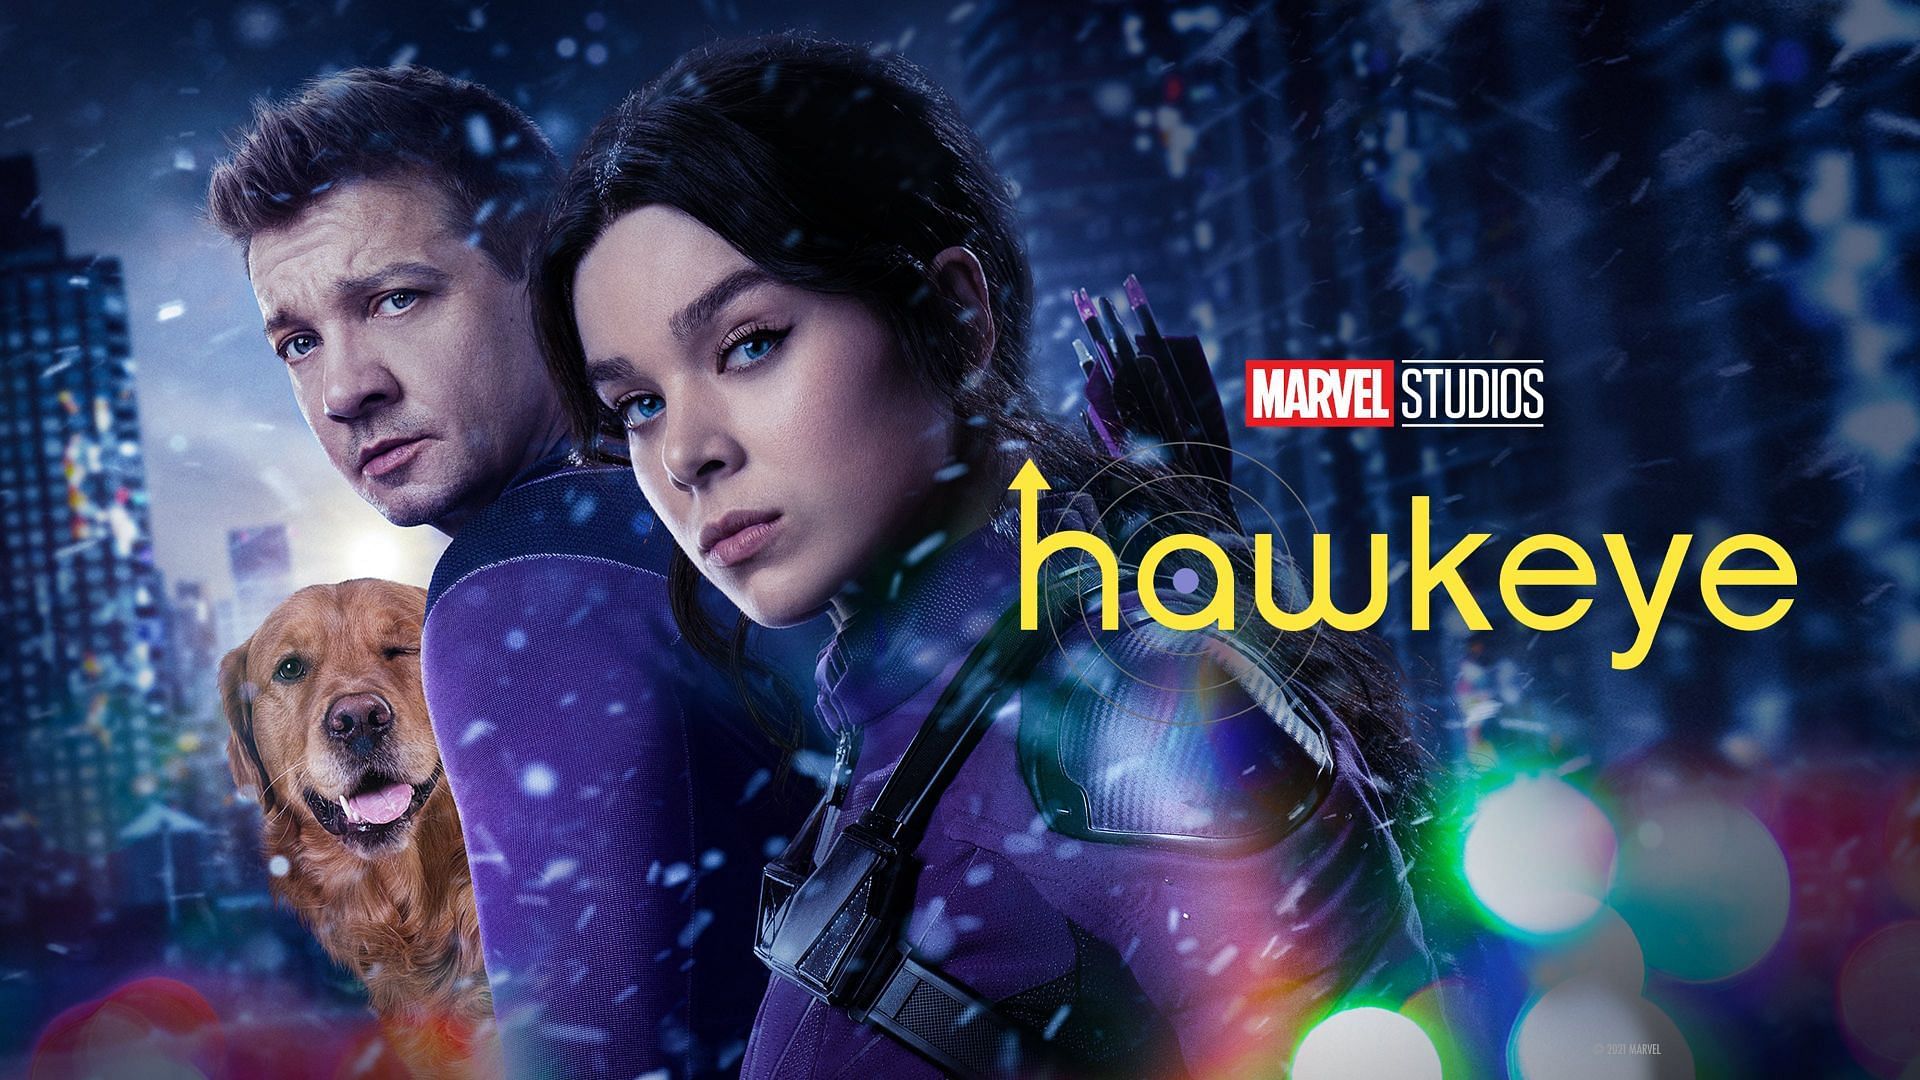 The &quot;Hawkeye&quot; TV series is a Marvel Studios television series that premiered on Disney+ on November 24, 2021. (Image via Marvel)